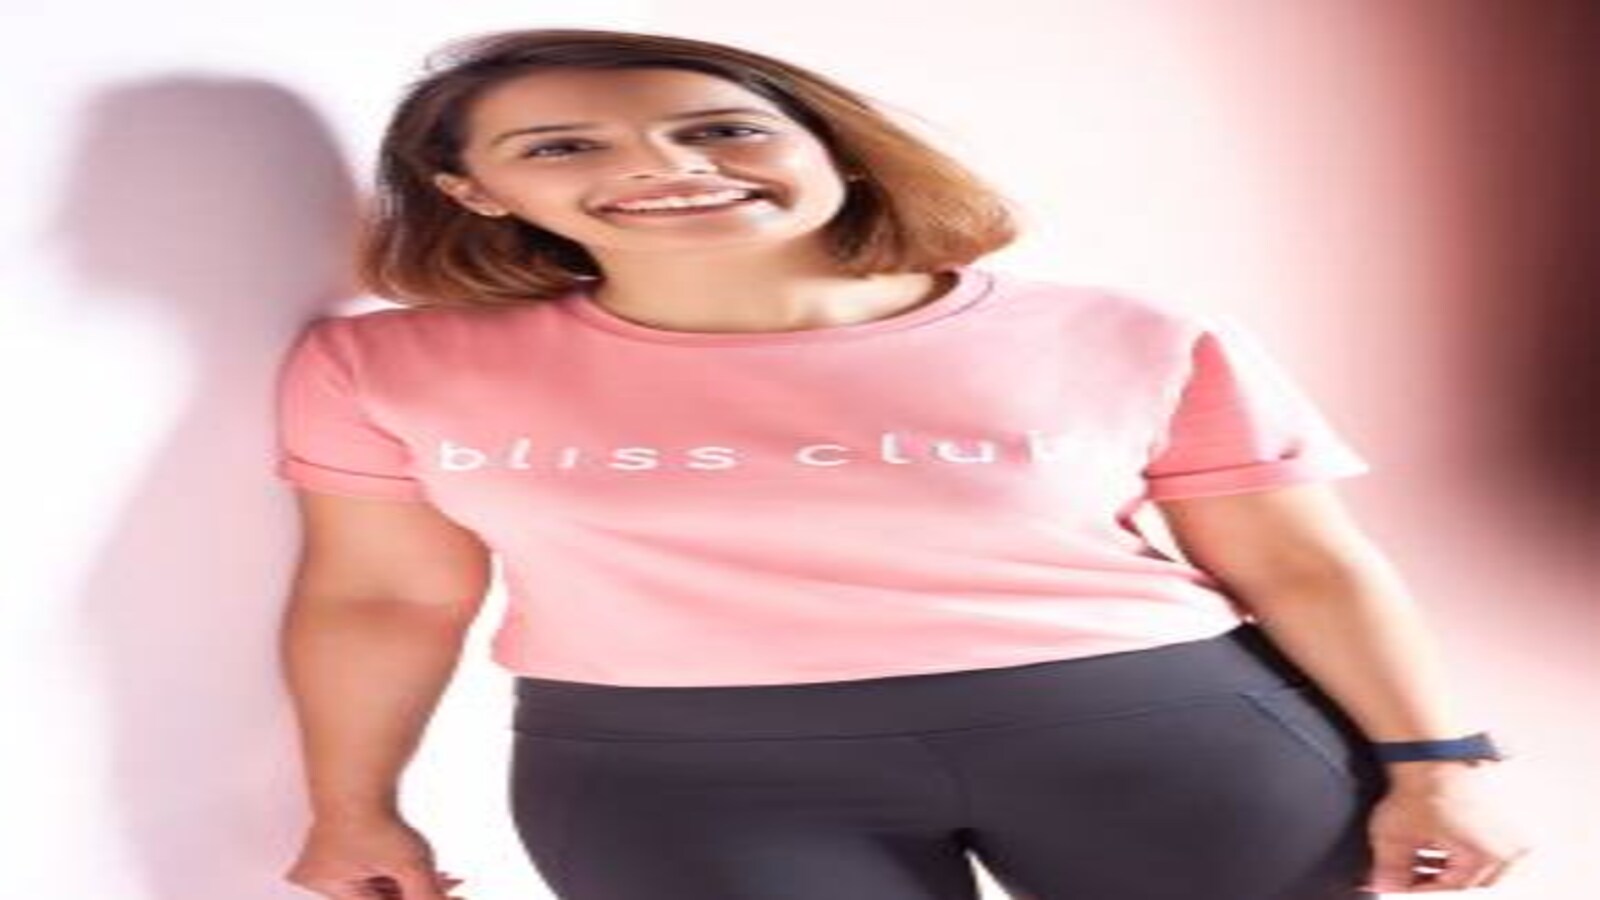 D2C Brand BlissClub Raises $15 Mn From Eight Road Ventures, Others